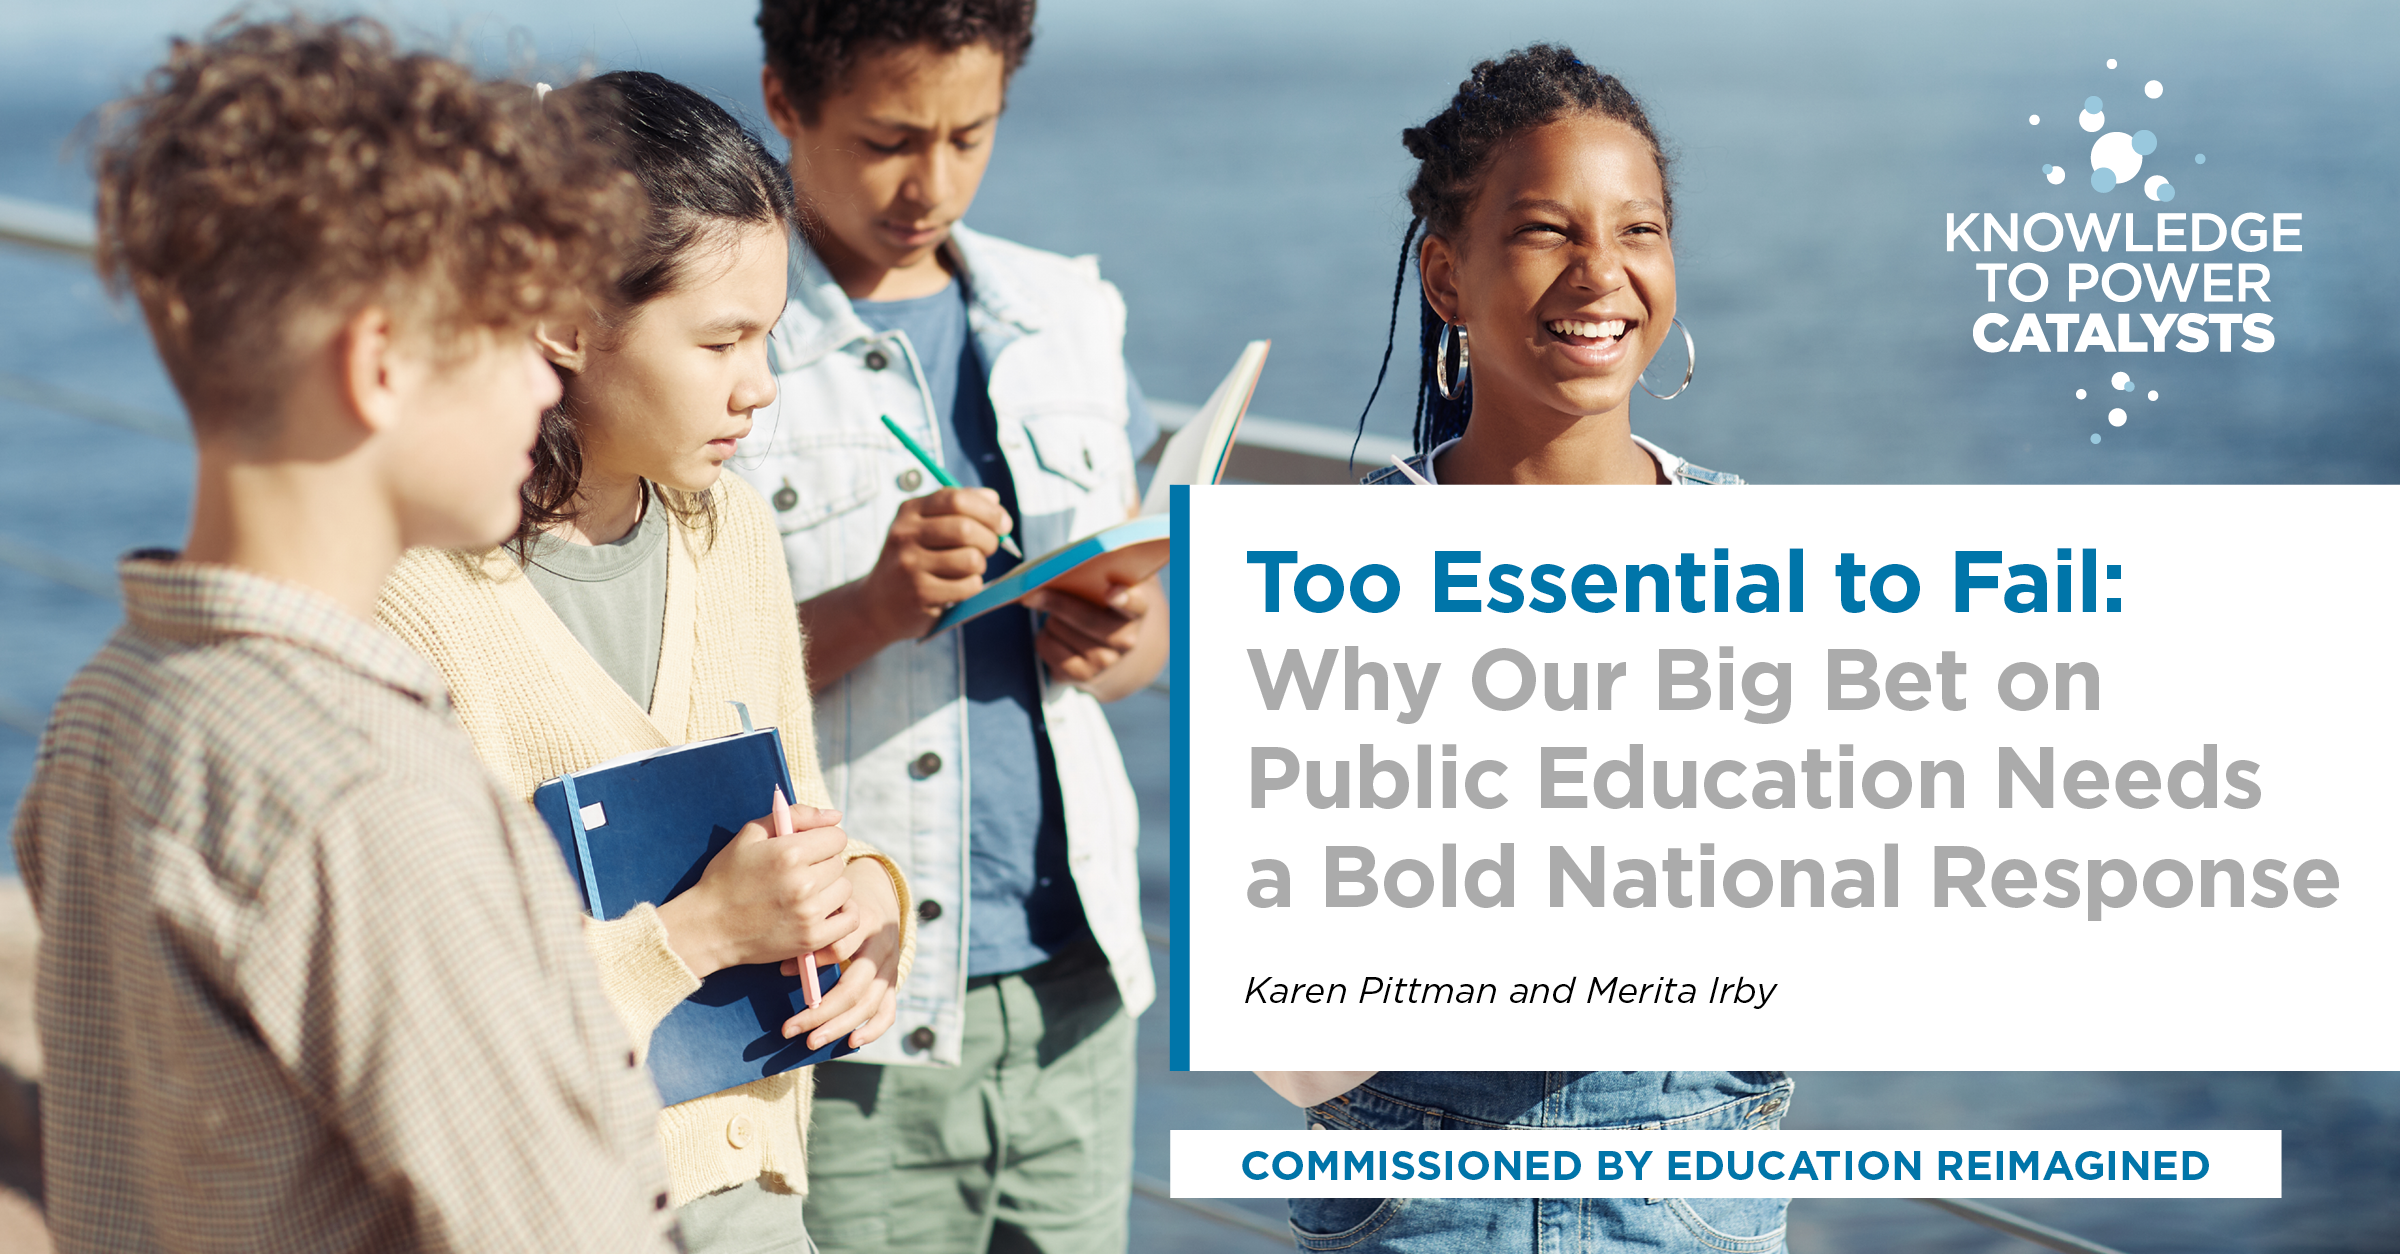 Too Essential to Fail: Why Our Big Bet on Public Education Needs a Bold National Response